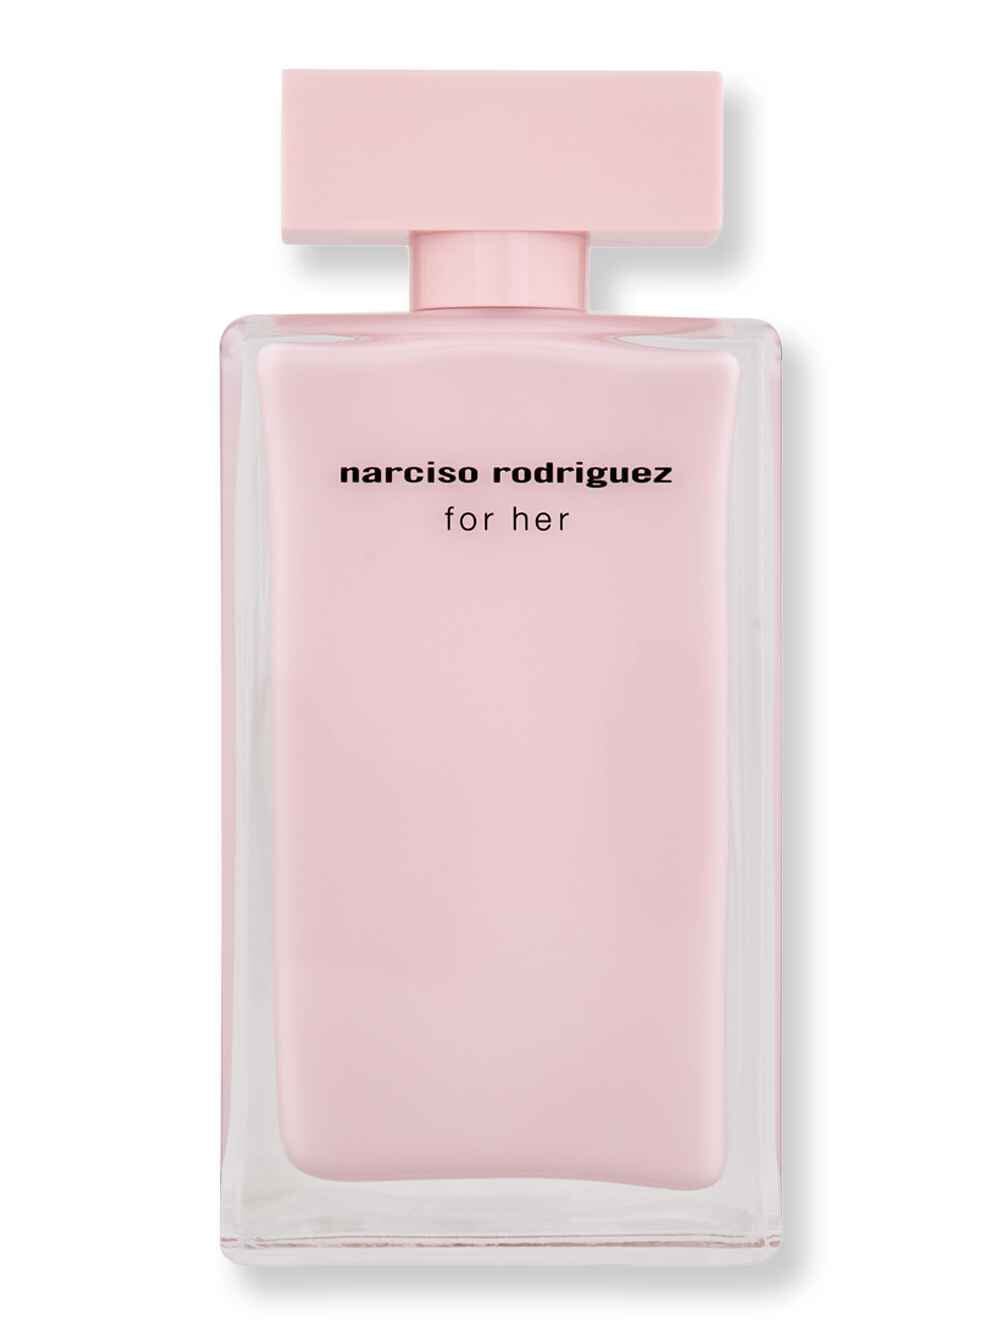 Narciso Rodriguez Narciso Rodriguez For Her EDP 3.3 oz Perfumes & Colognes 